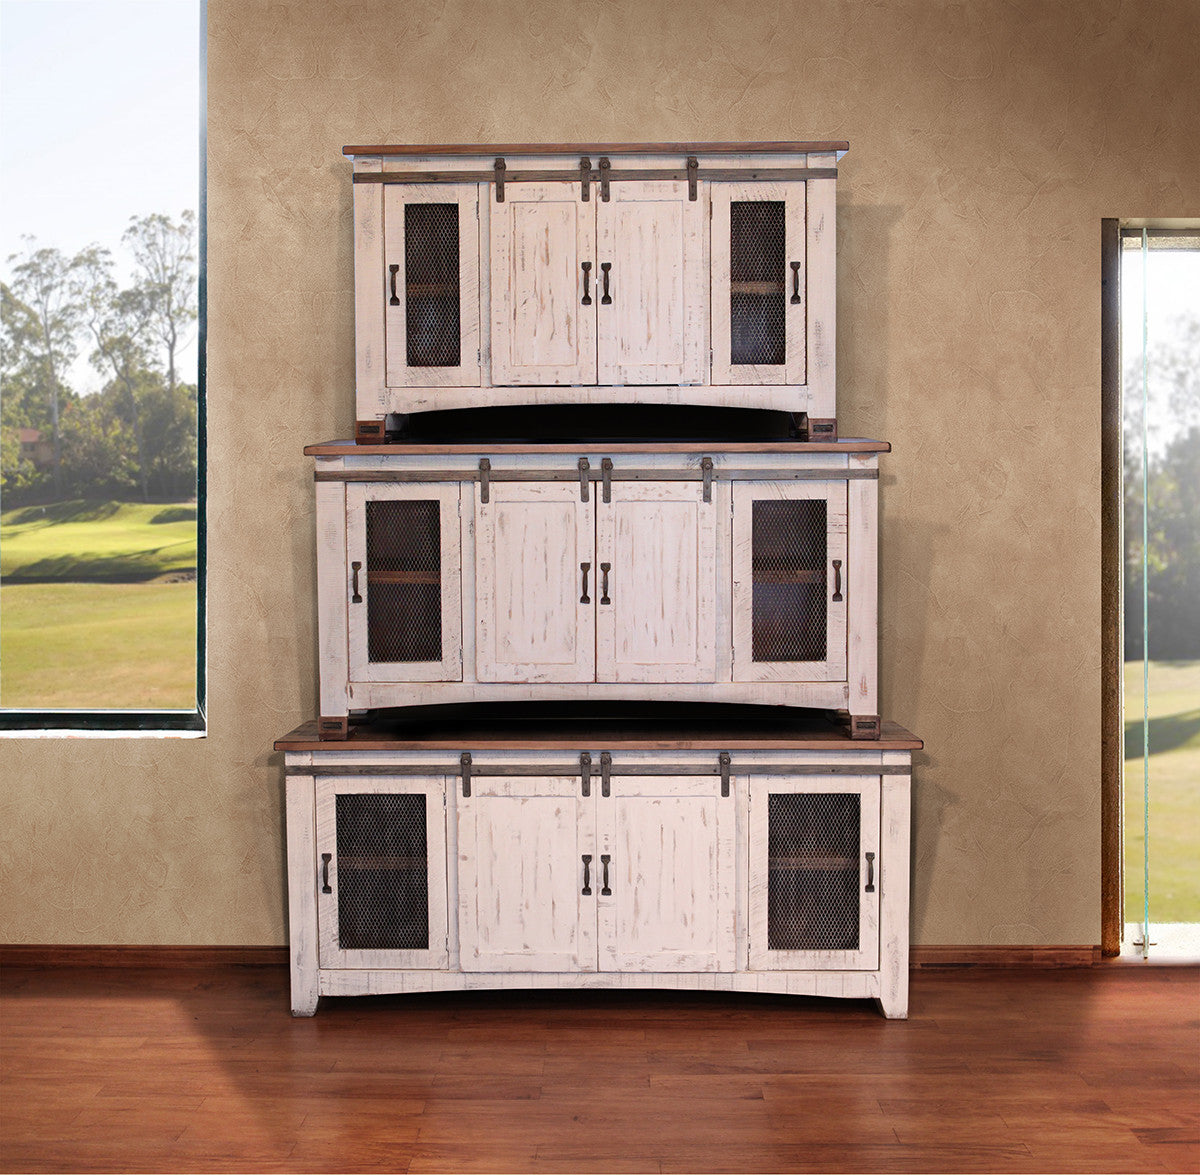 60" White Solid Wood Cabinet Enclosed Storage Distressed TV Stand